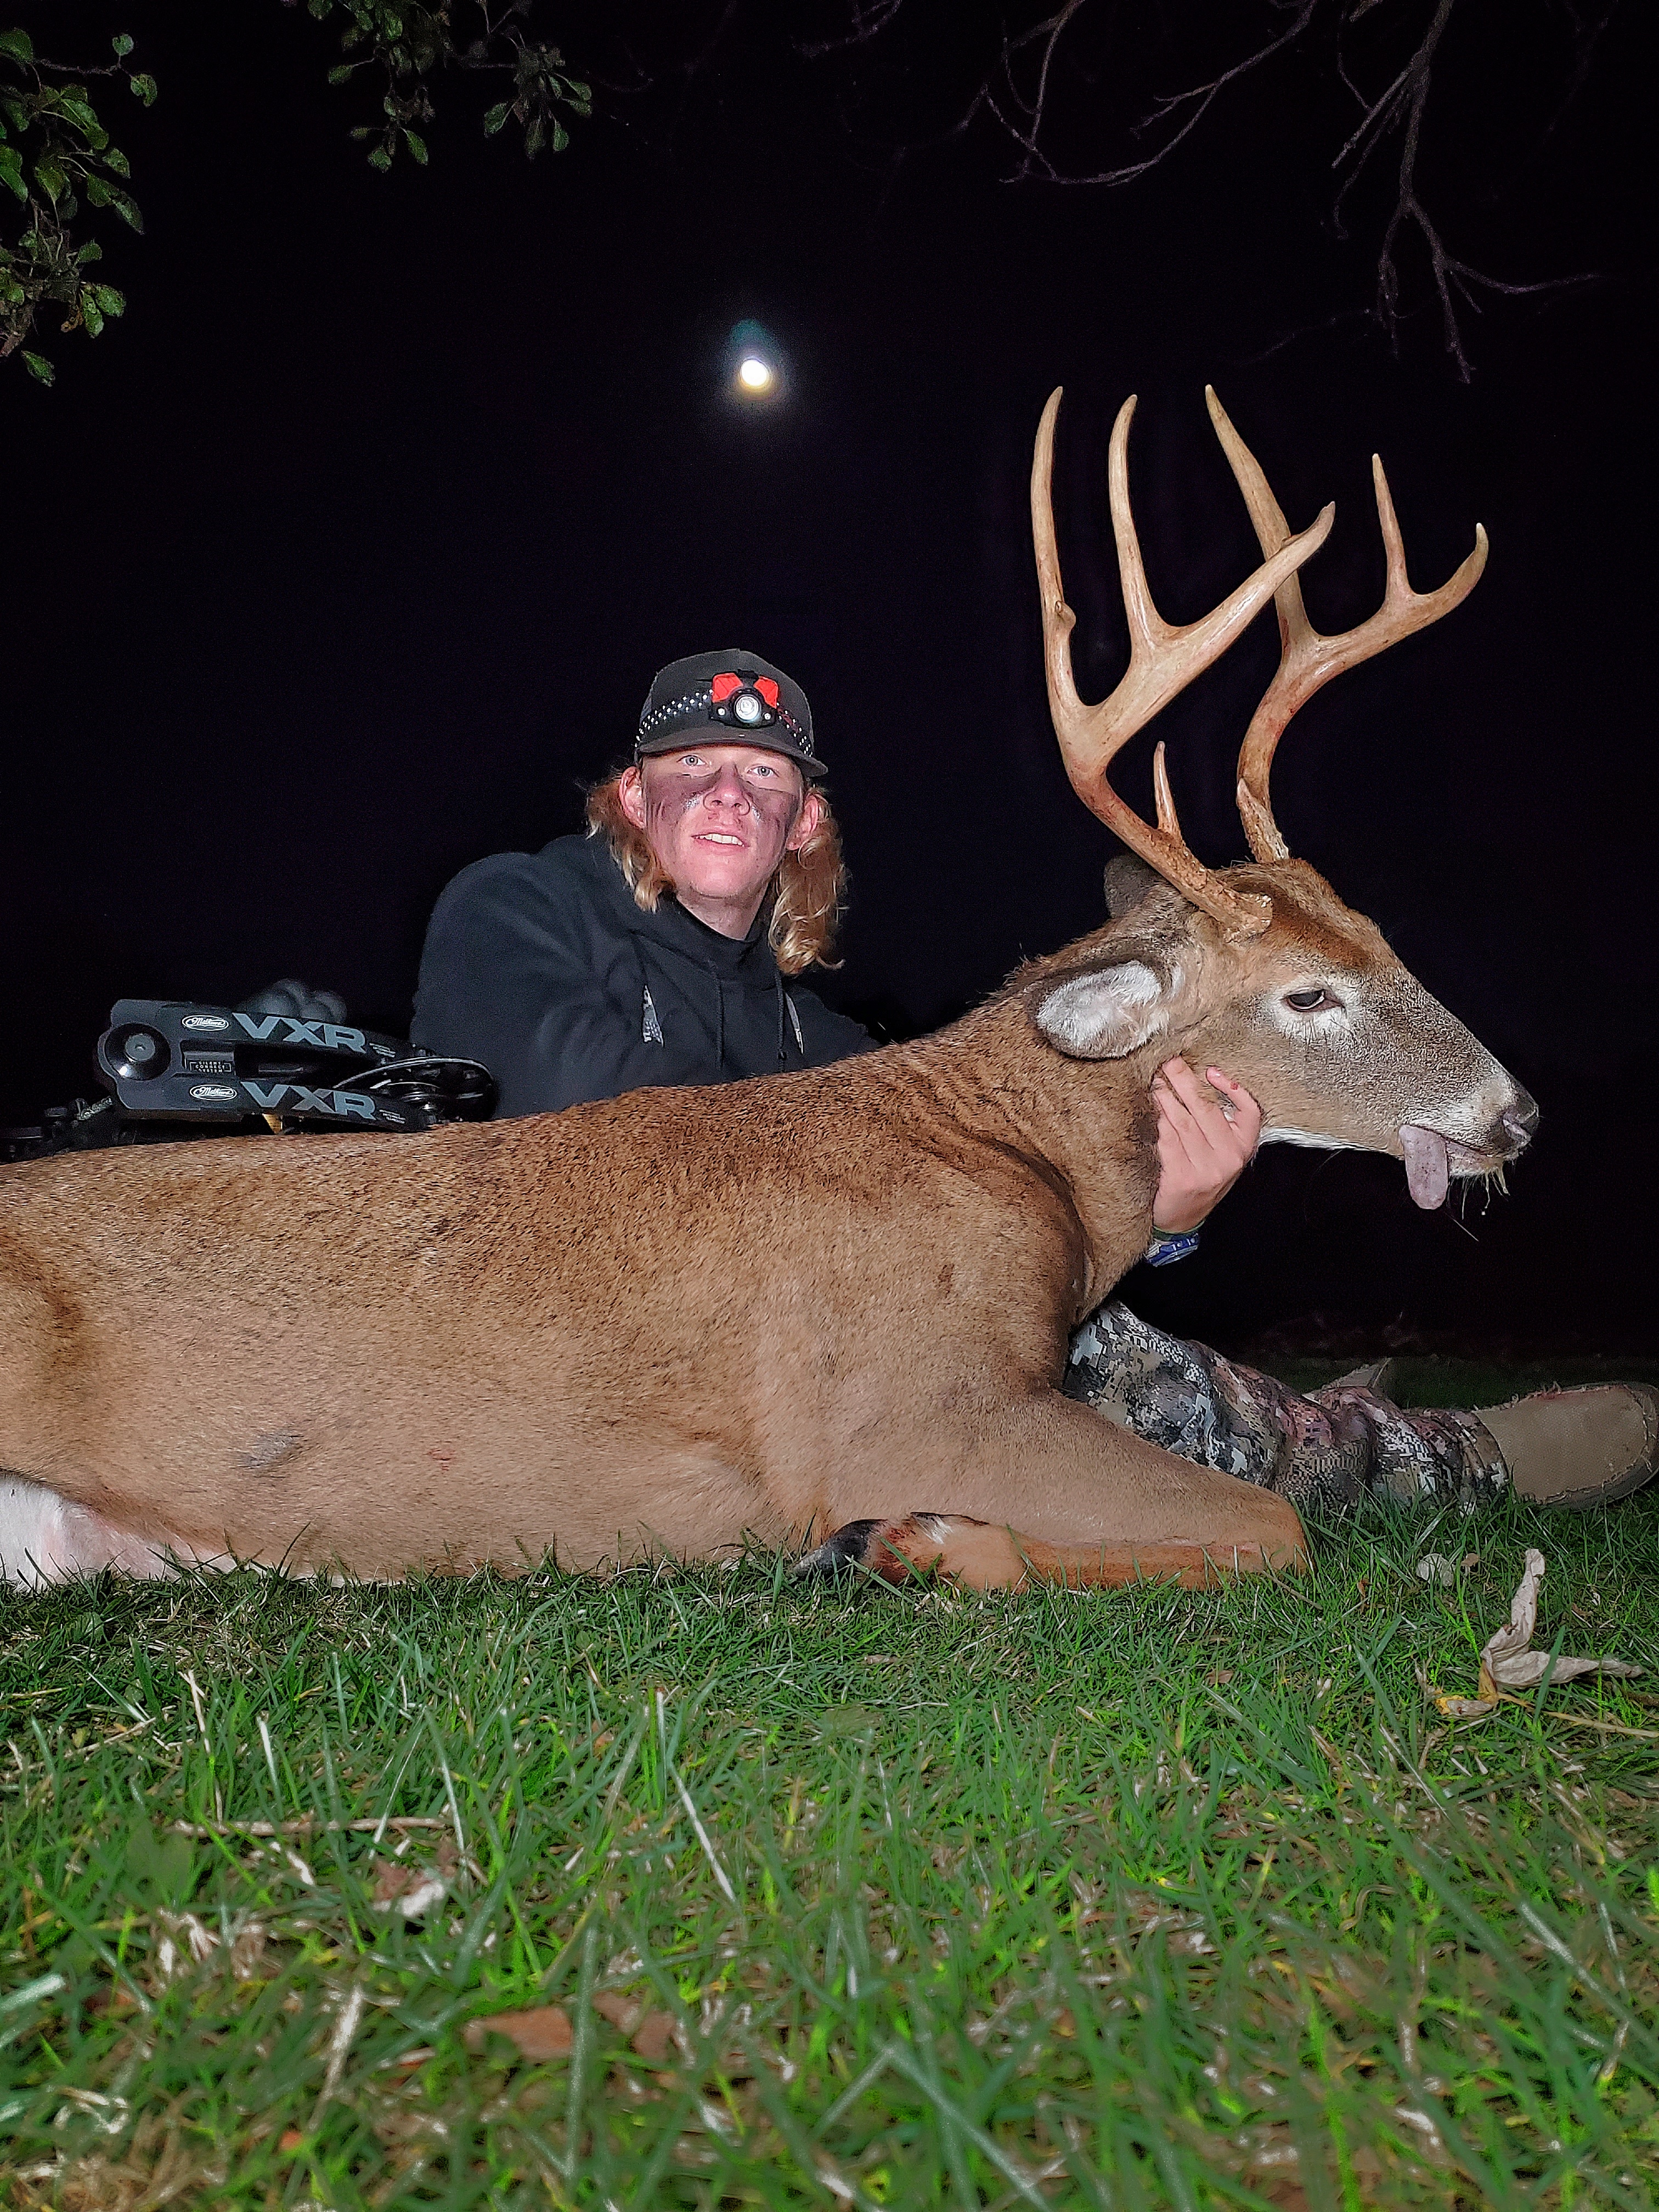 60x custom string staff shooter Colton Price sitting with a deer